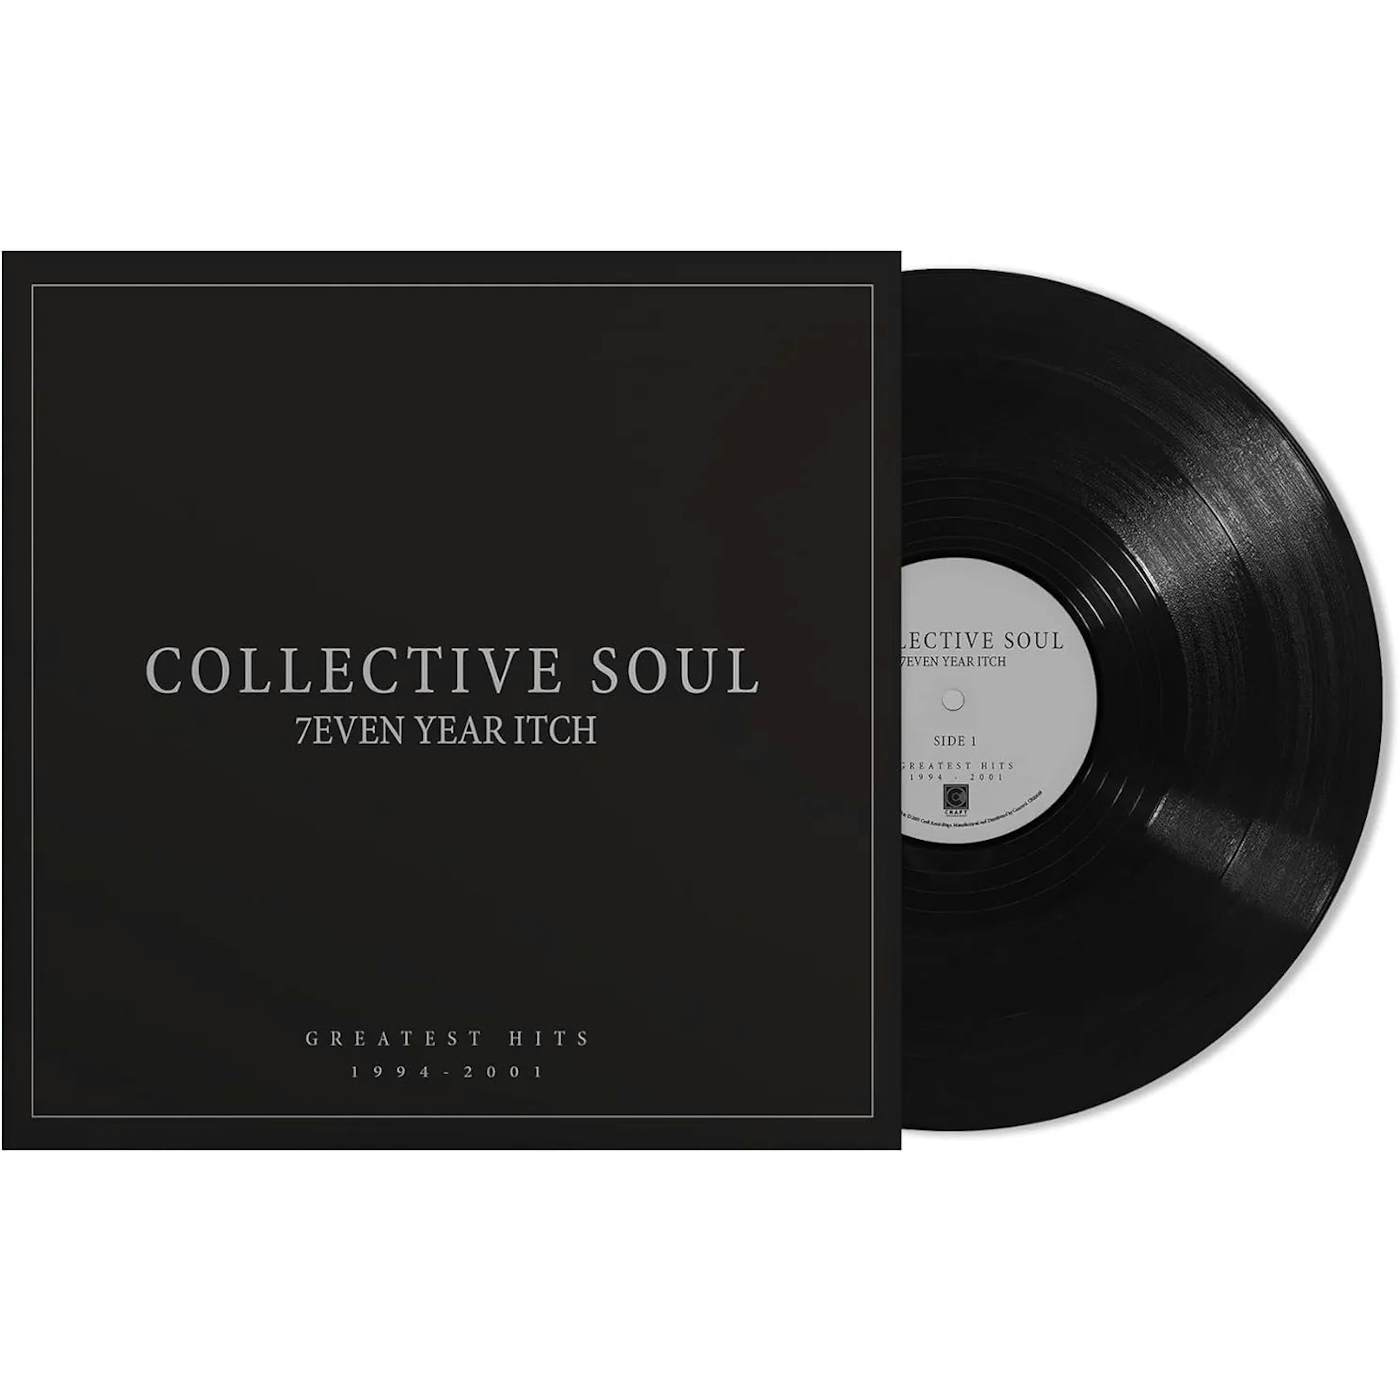 Collective Soul - 7even Year Itch: Greatest Hits, 94-01 (Vinyl)